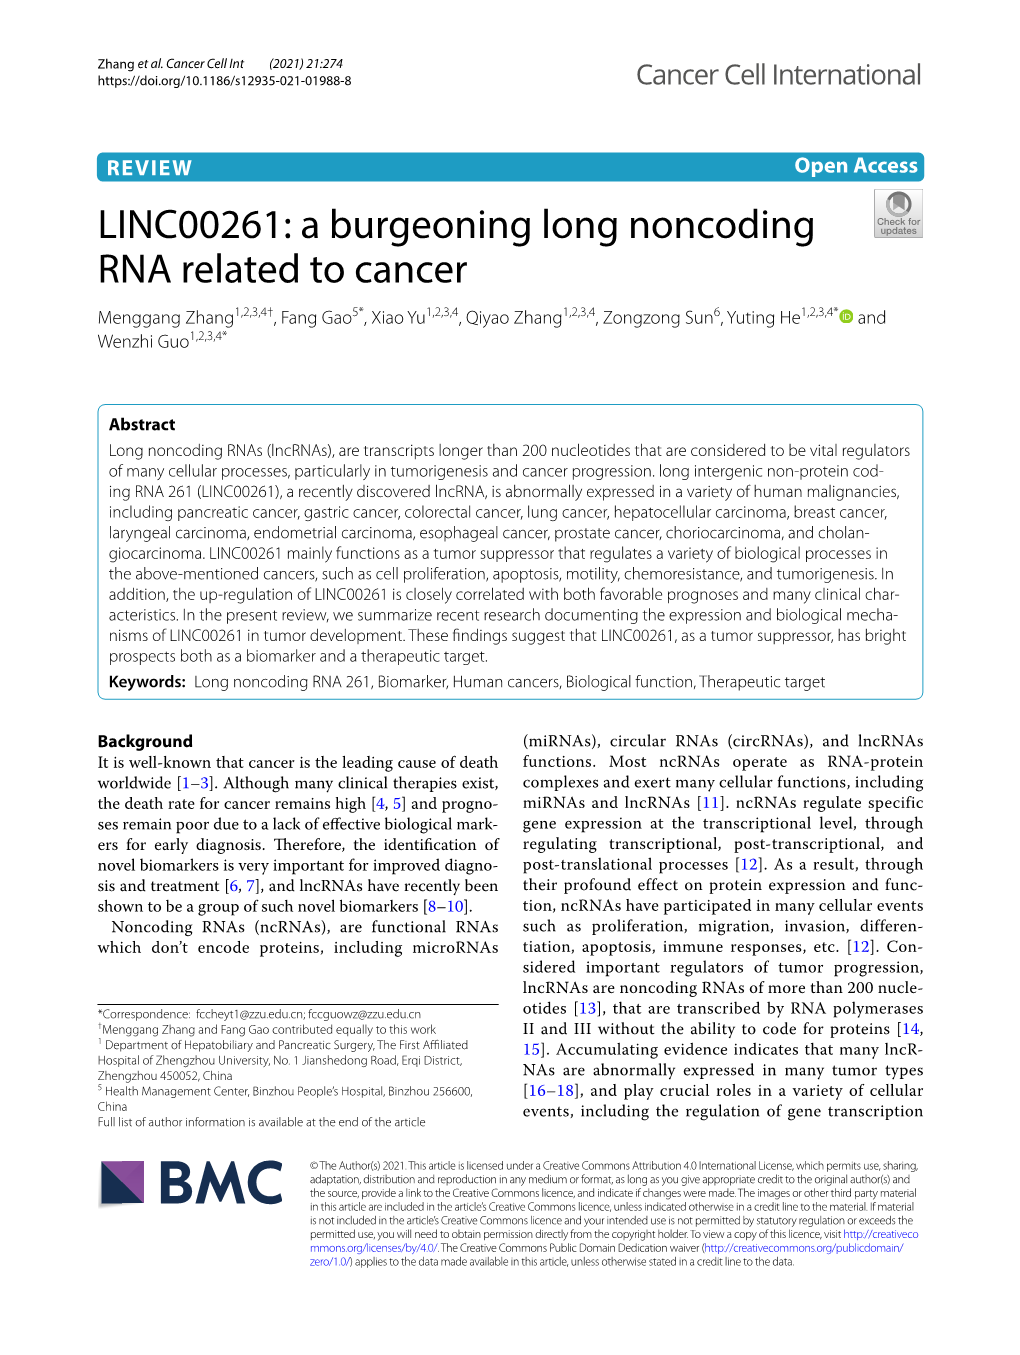 A Burgeoning Long Noncoding RNA Related to Cancer